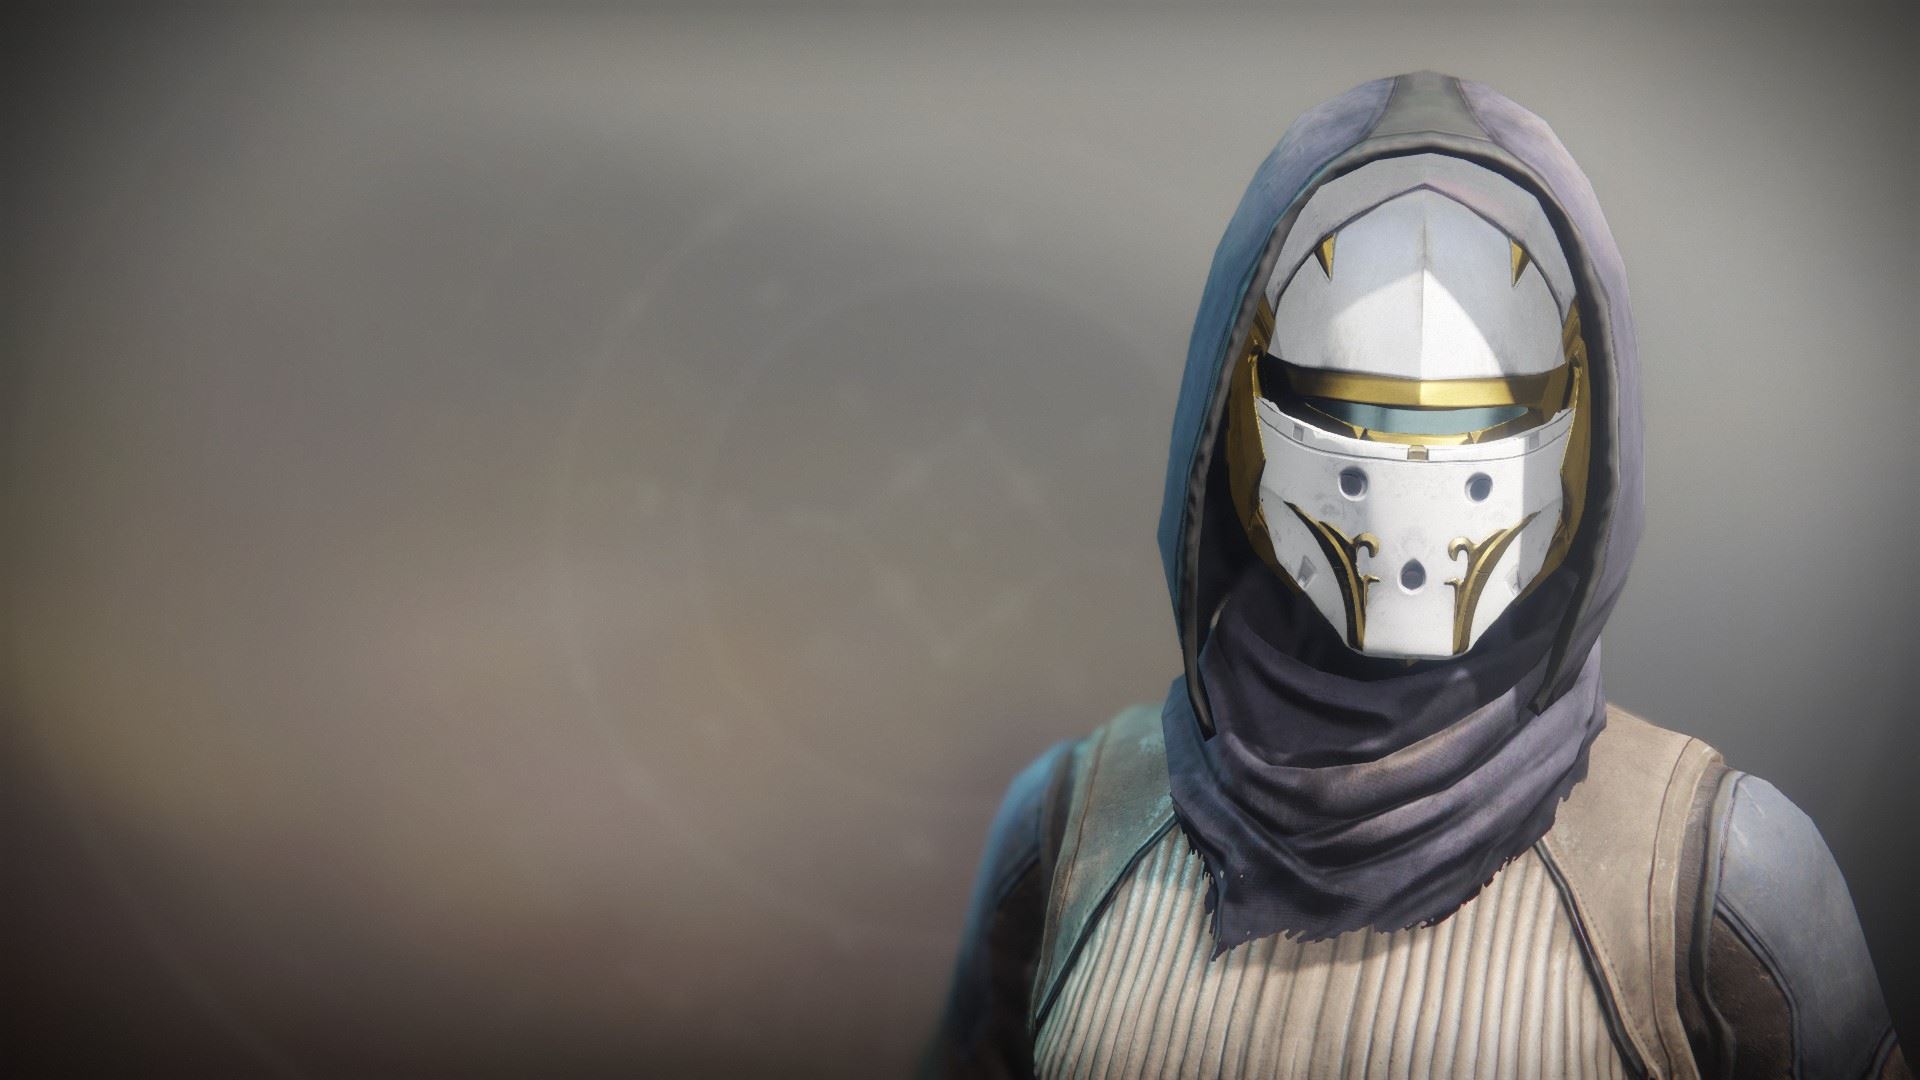 An in-game render of the Solstice Mask (Resplendent).